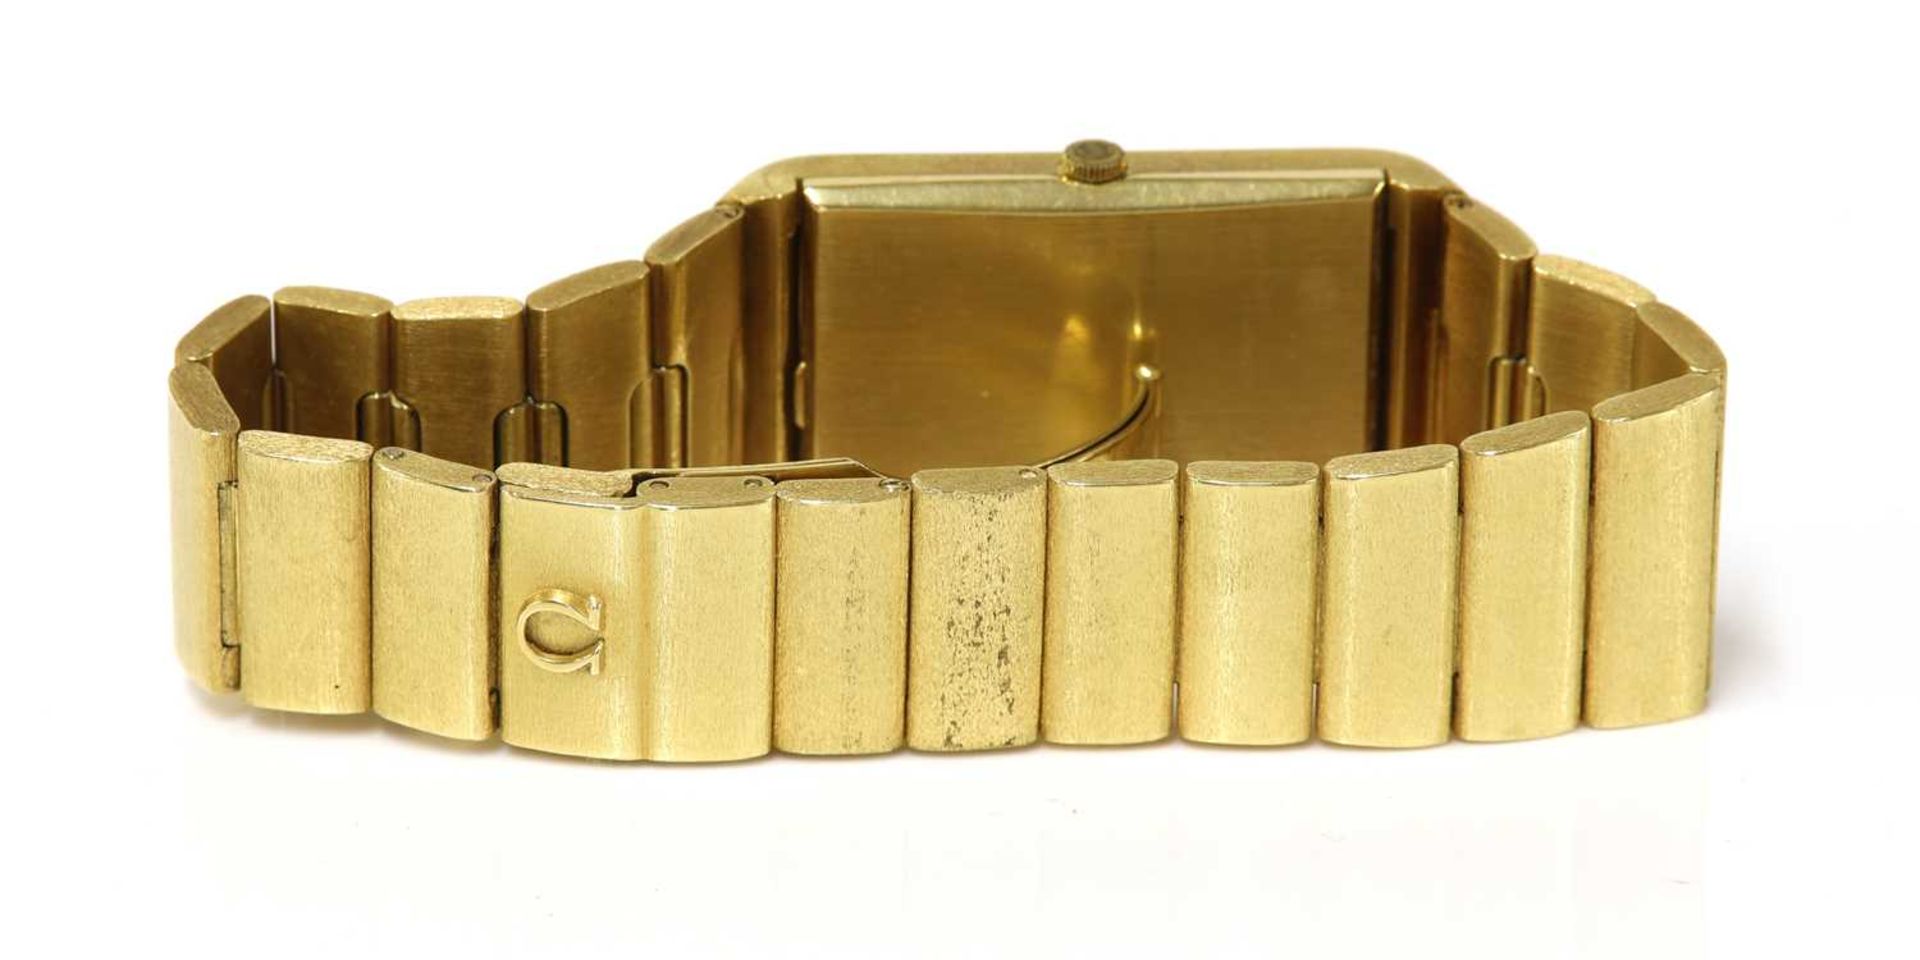 A gentlemen’s 18ct gold Omega ‘Constellation’ automatic bracelet watch, c.1970, - Image 3 of 5